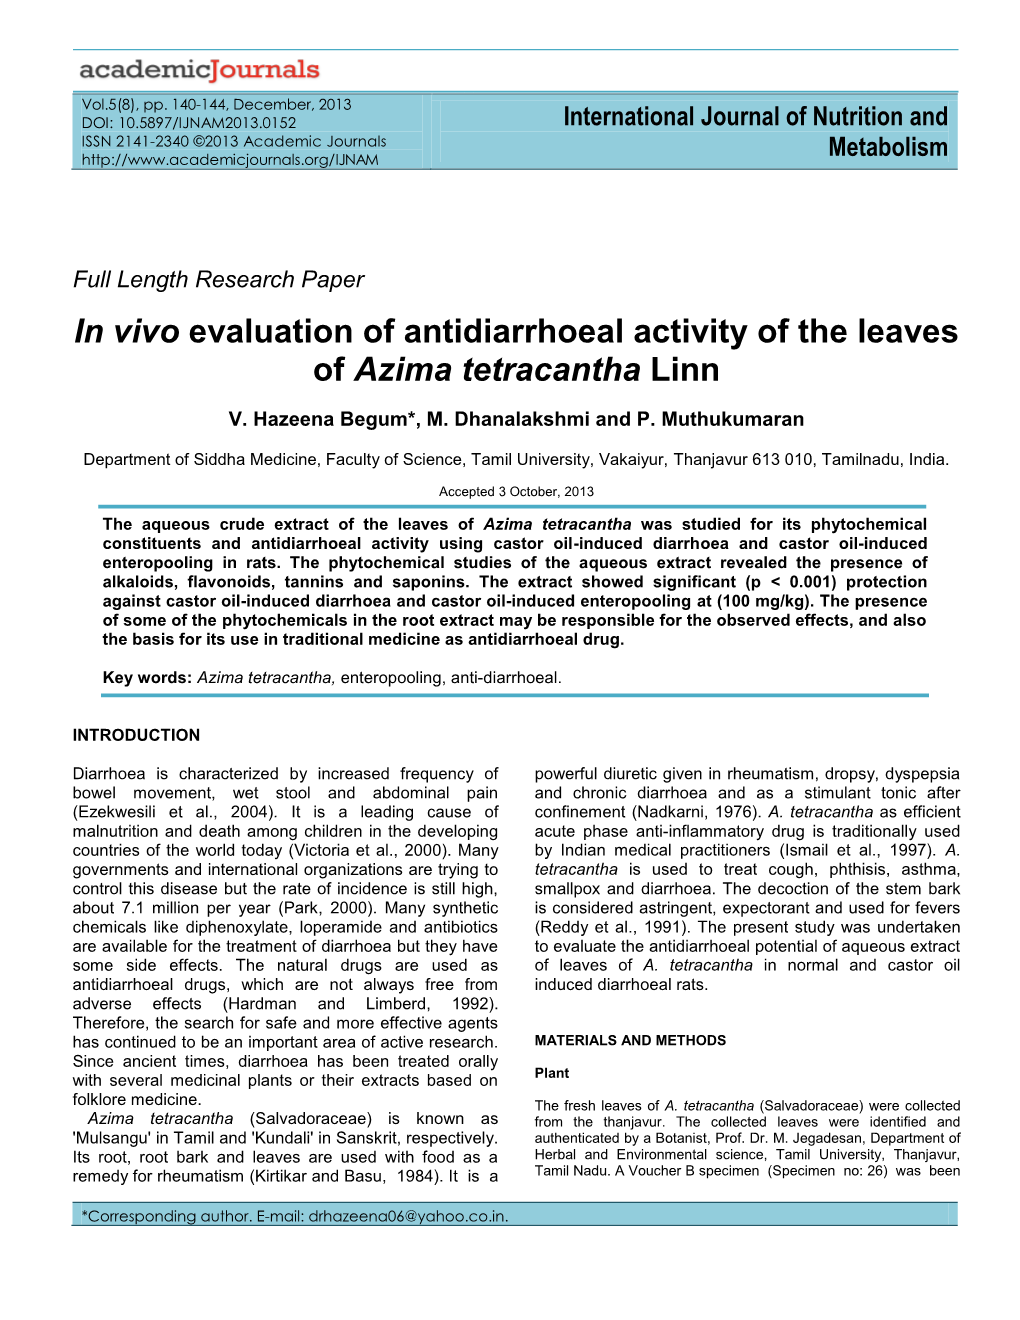 In Vivo Evaluation of Antidiarrhoeal Activity of the Leaves of Azima Tetracantha Linn